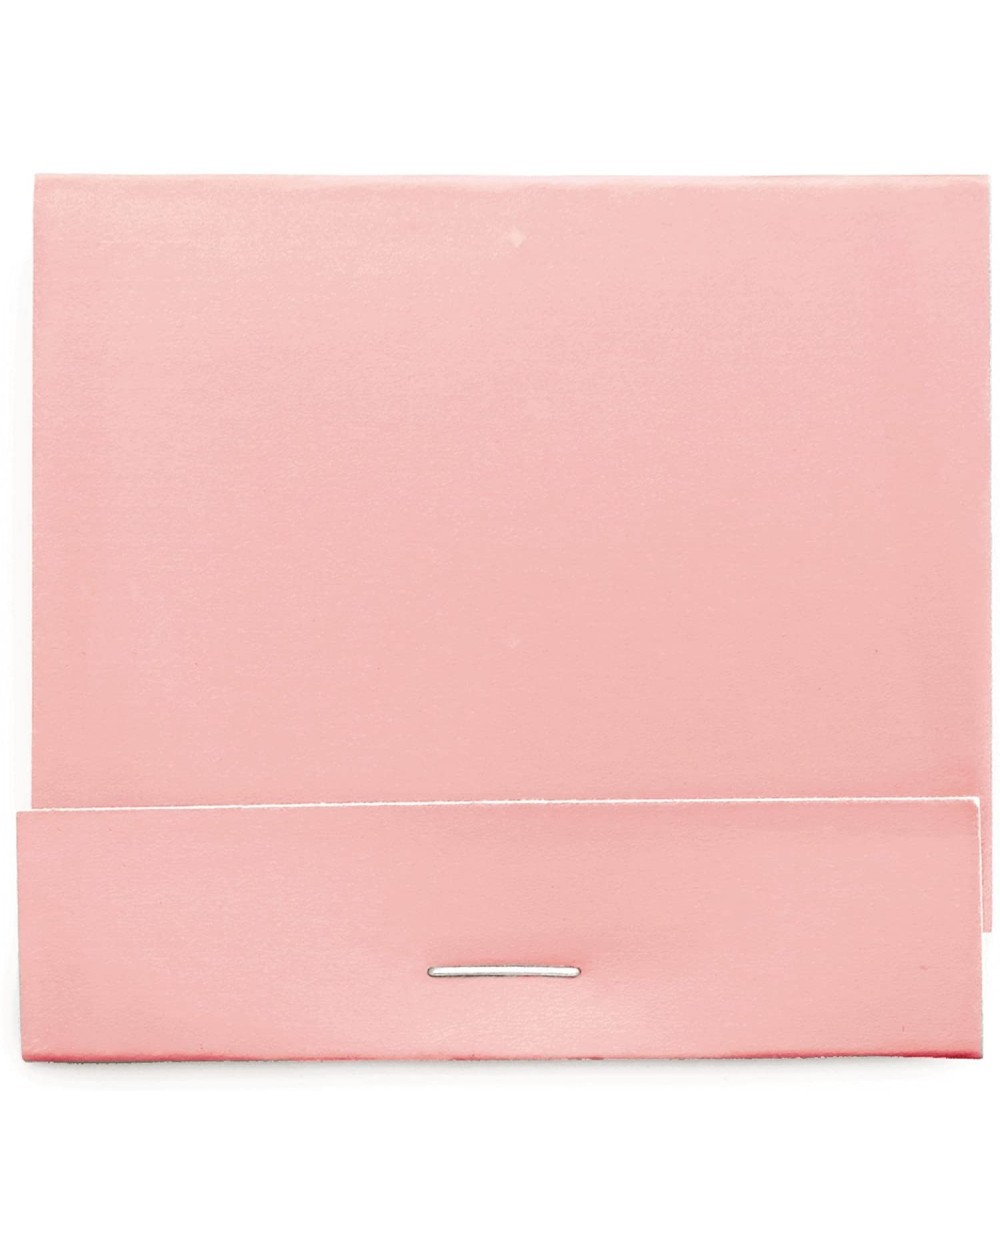 Favors Peony Pink Matchbook 50 pack- Book - Peony Pink - C912H6RH9FF $22.31